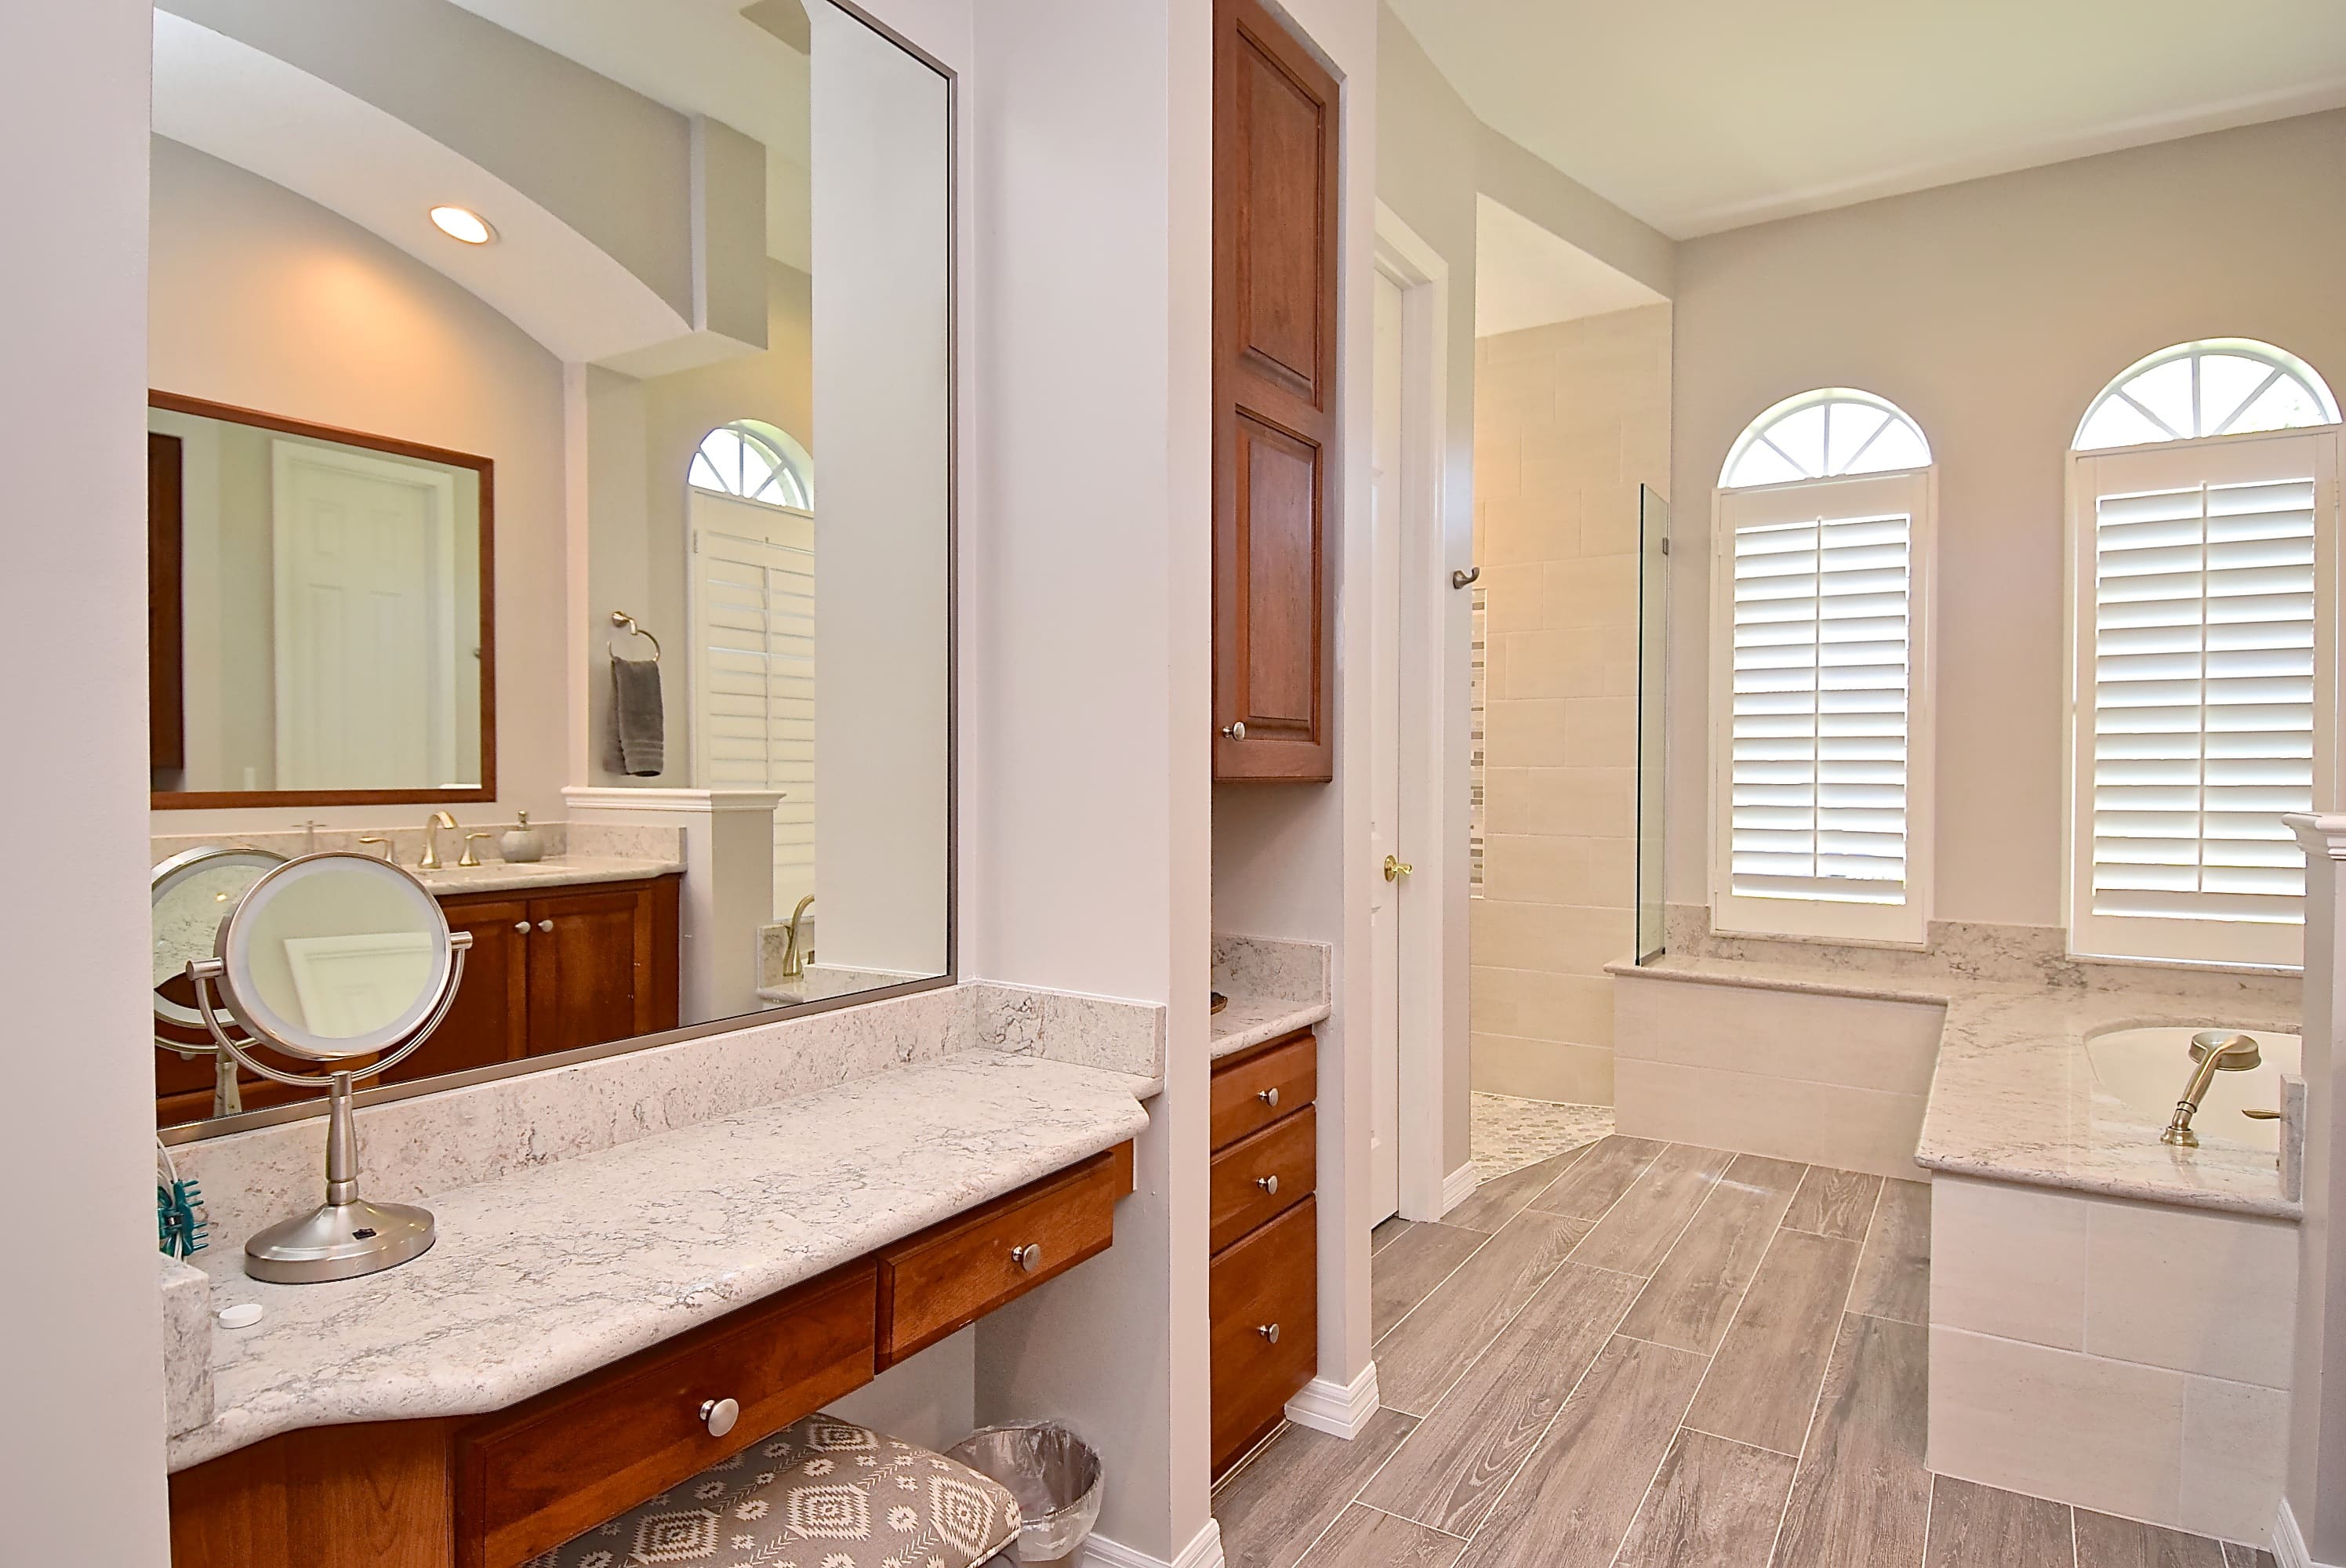 Primary Bathroom with Vanity for Makeup and Soaking Tub Windows in Sarasota Remodel 